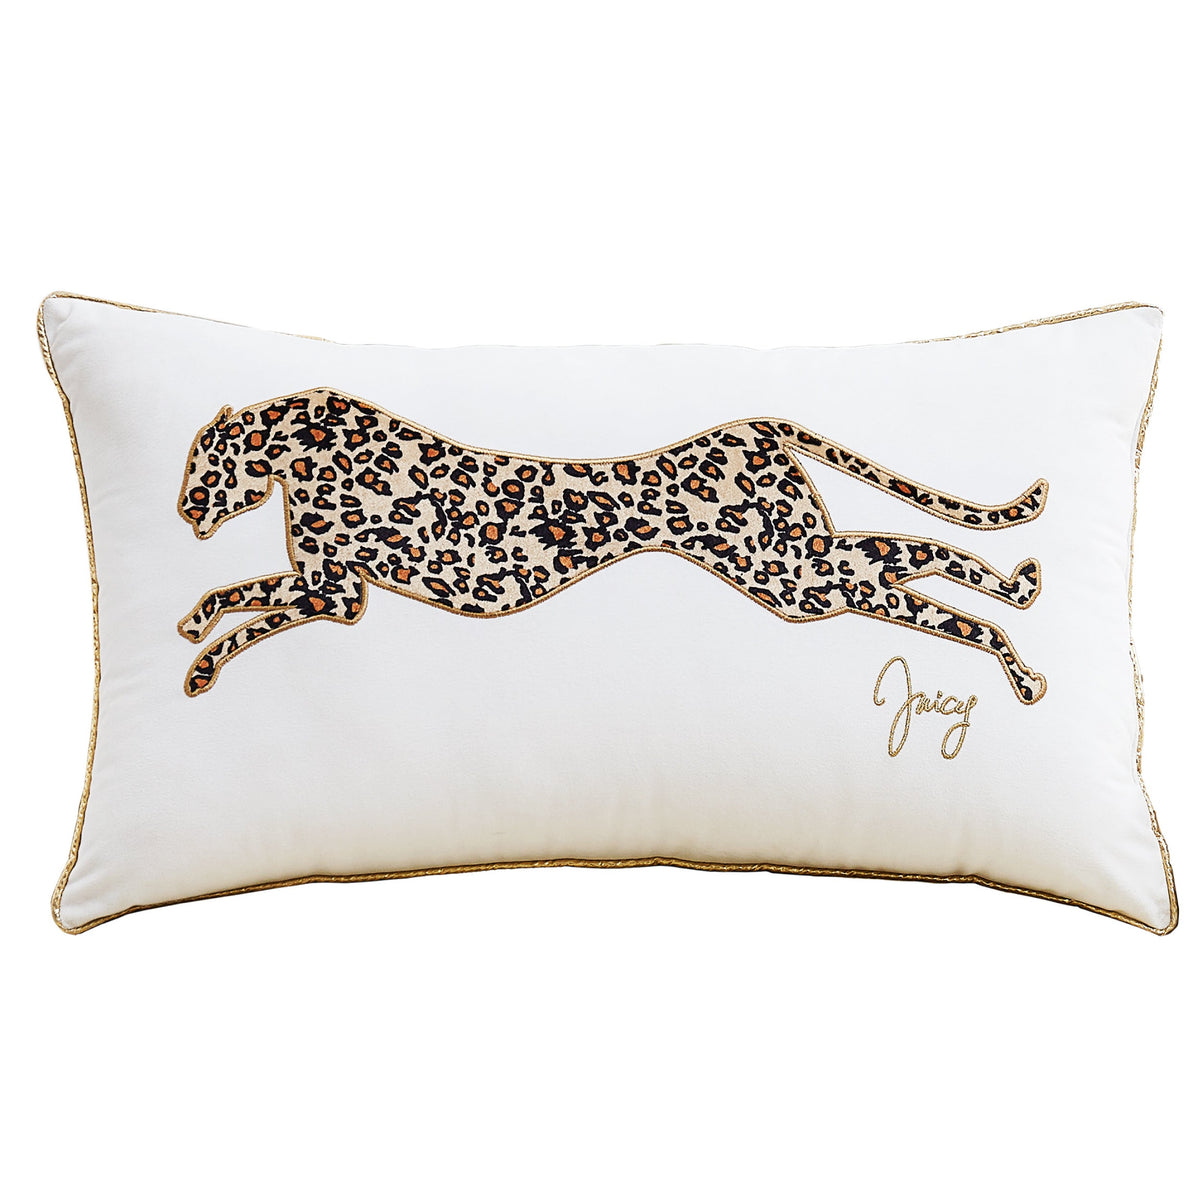 Juicy Couture Embroidered Leopard Pillow Cream